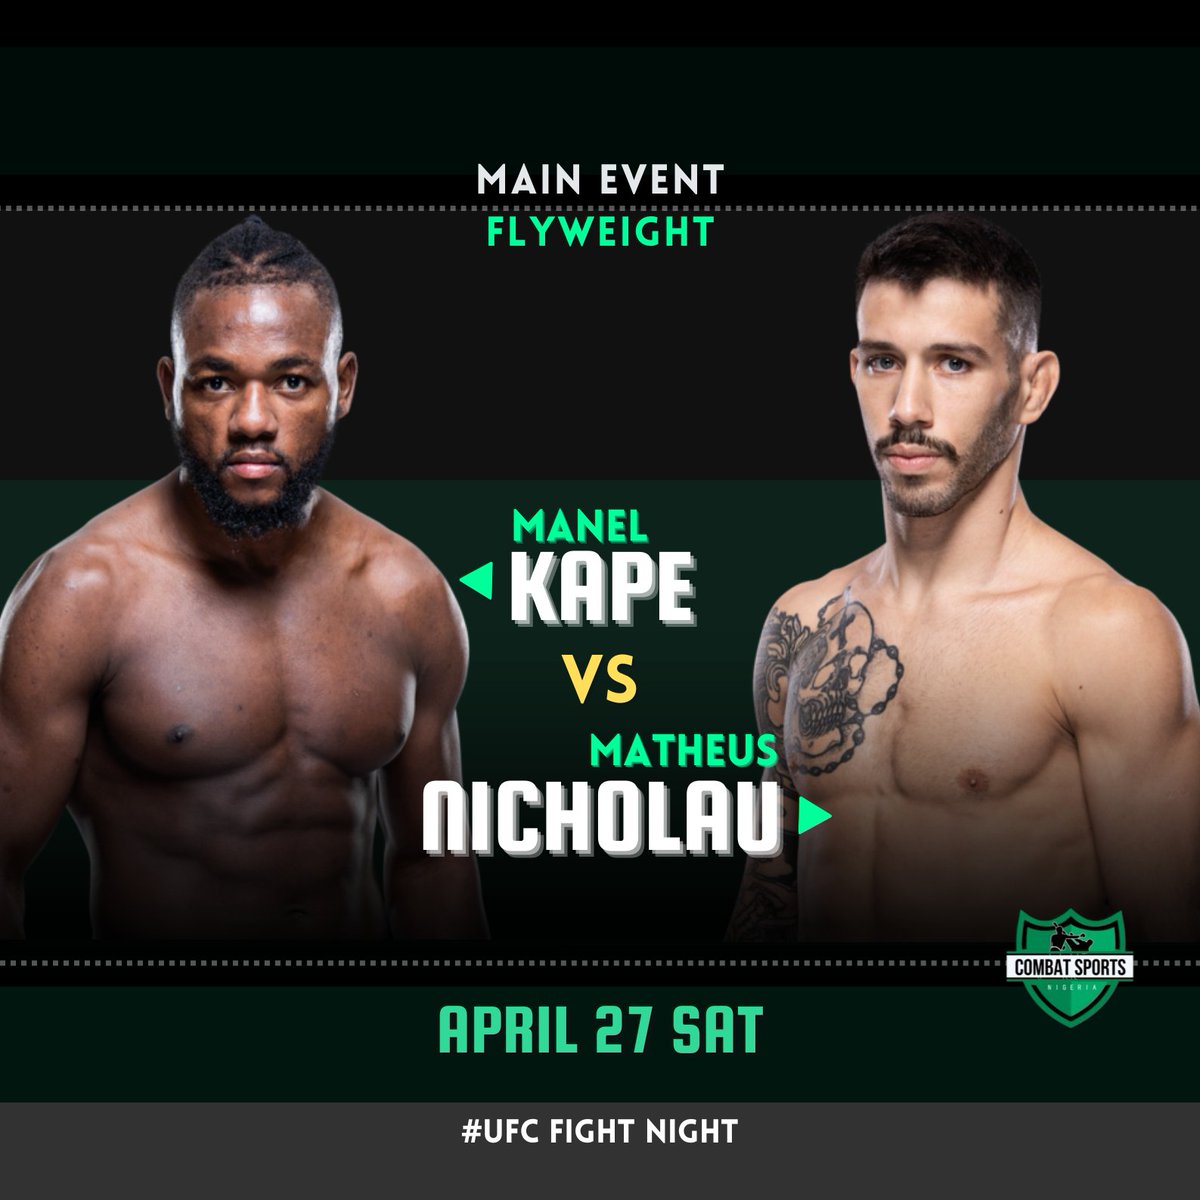 The 'StarBoy' @ManelKape (19-6) with his 84% finish rate takes  Matheus Nicolau (19-3-1) in a flyweight rematch for the ages! Don't miss this explosive fight at UFC on ESPN 55 on April 27th!  #UFC #MMATwitter #UFConESPN55 #ufcfightnight  #Flyweight